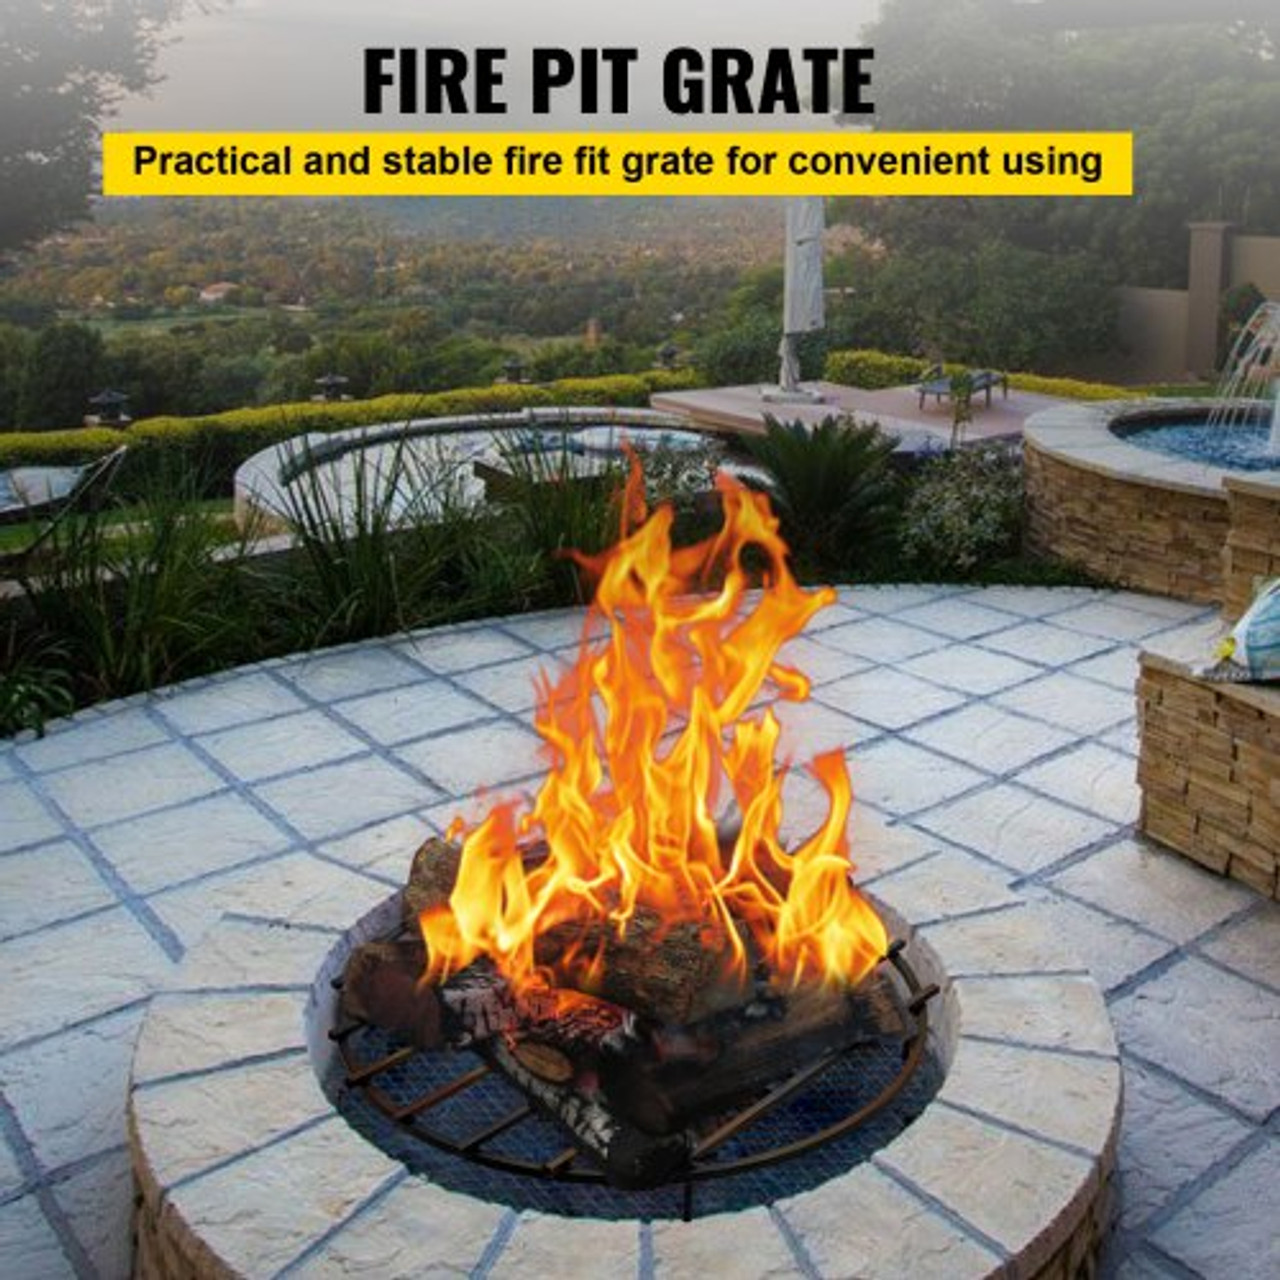 Fire Pit Grate, Heavy Duty Iron Round Firewood Grate, Round Wood Fire Pit Grate 36", Firepit Grate with Black Paint, Fire Grate with 9 Removable Legs for Burning Fireplace and Firepits